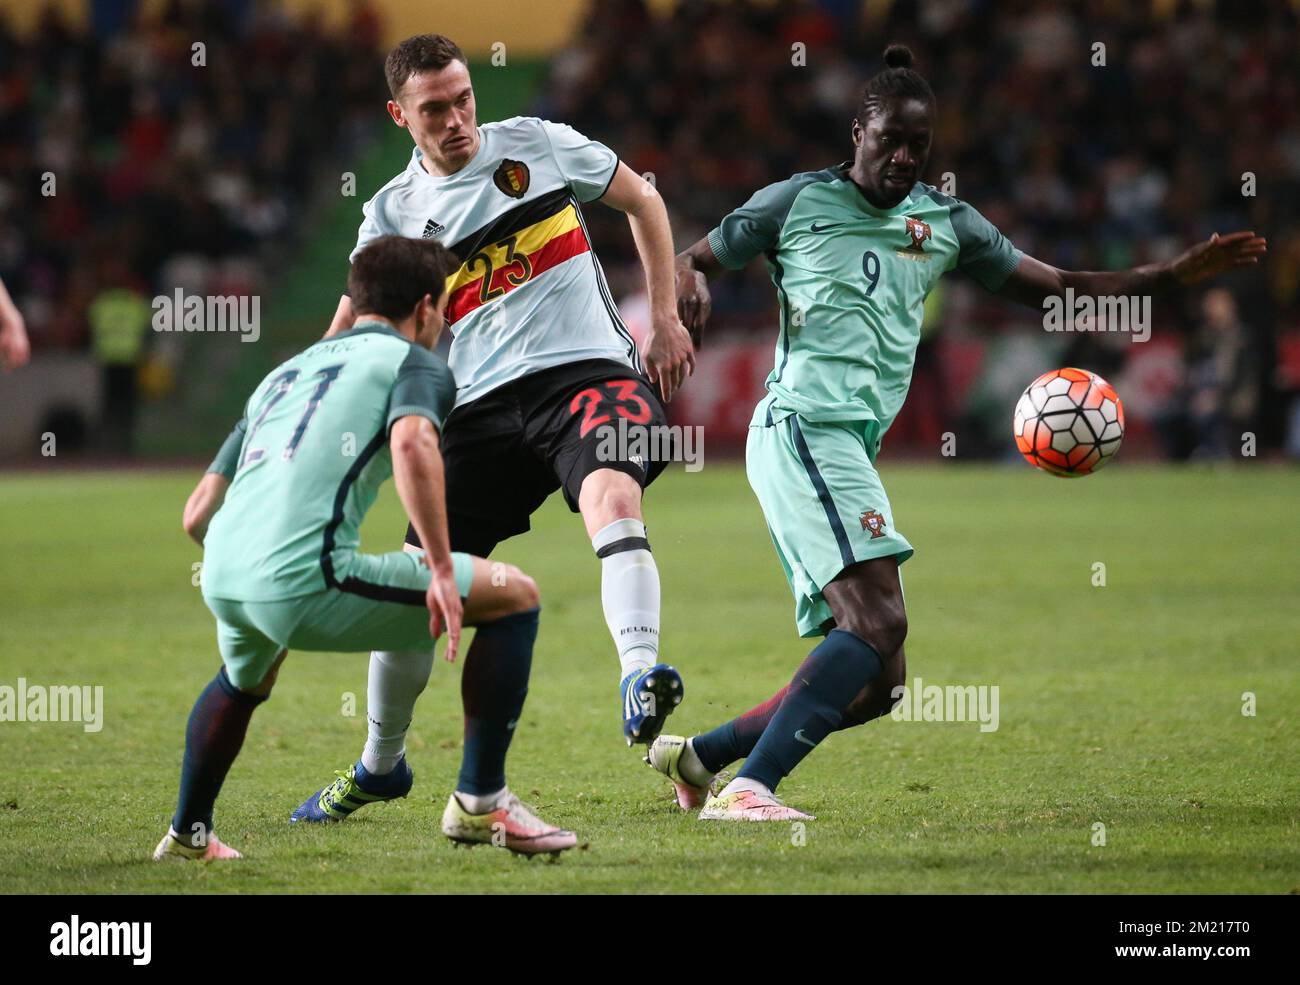 Belgium's Thomas Vermaelen and Portugal's Eder fight for the ball during a soccer game between the Portugal national team and the Belgian Red Devils in Leiria, Portugal, Tuesday 29 March 2016, a preparation for the upcoming Euro2016 tournament. The match was moved due to safety concerns after the Brussels terrorists attacks. BELGA PHOTO VIRGINIE LEFOUR Stock Photo